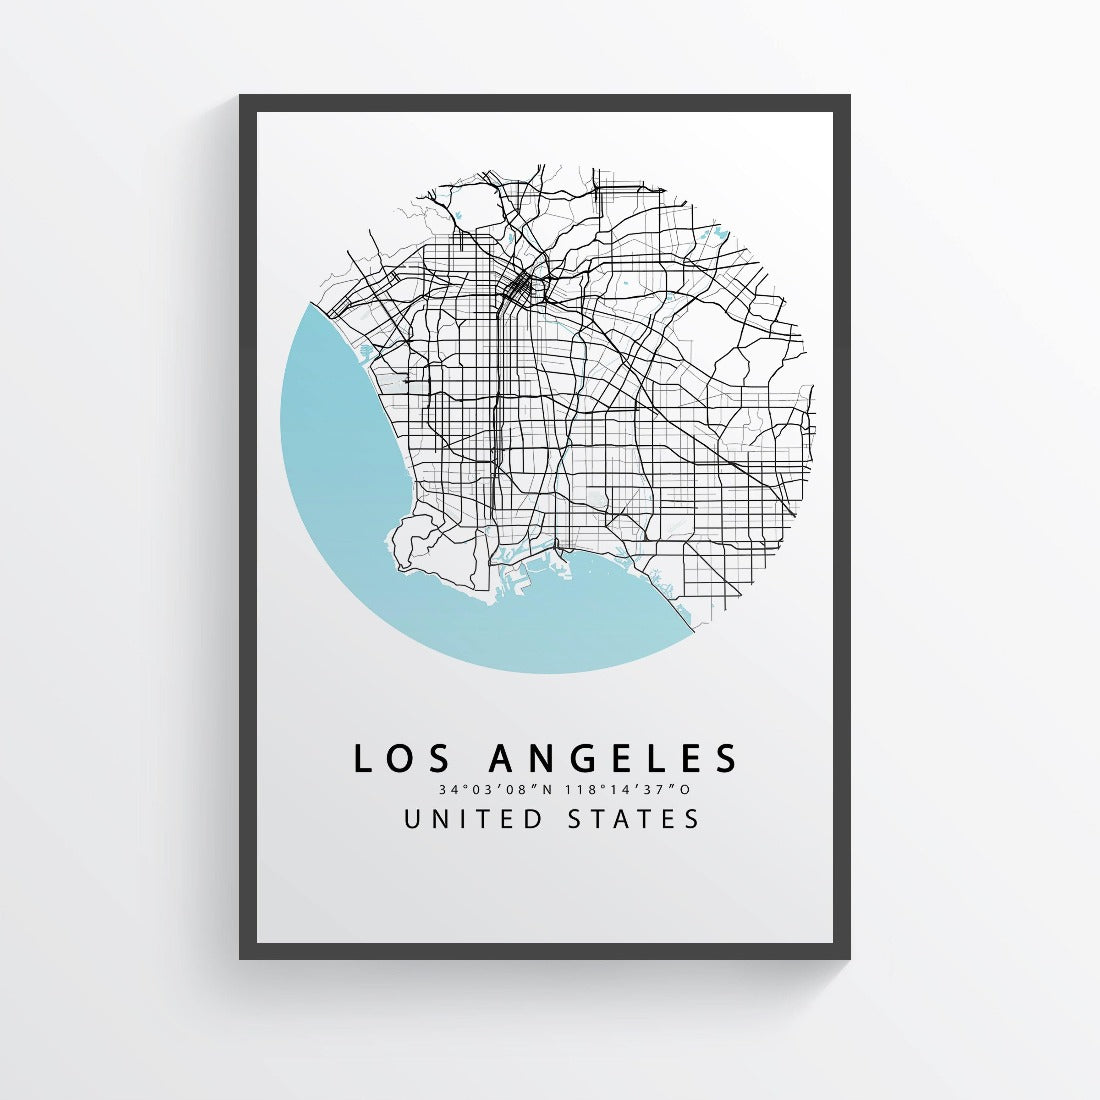 With this Los Angeles City Street Map Print, you can keep the City of Angels close by. This map print is the perfect way to keep track of your favorite places in LA. The bold colors and clean lines make this map print a great addition to any room. Plus, it's a great way to keep track of your travels in LA. This map print is the perfect way to show your love for the City of Angels.